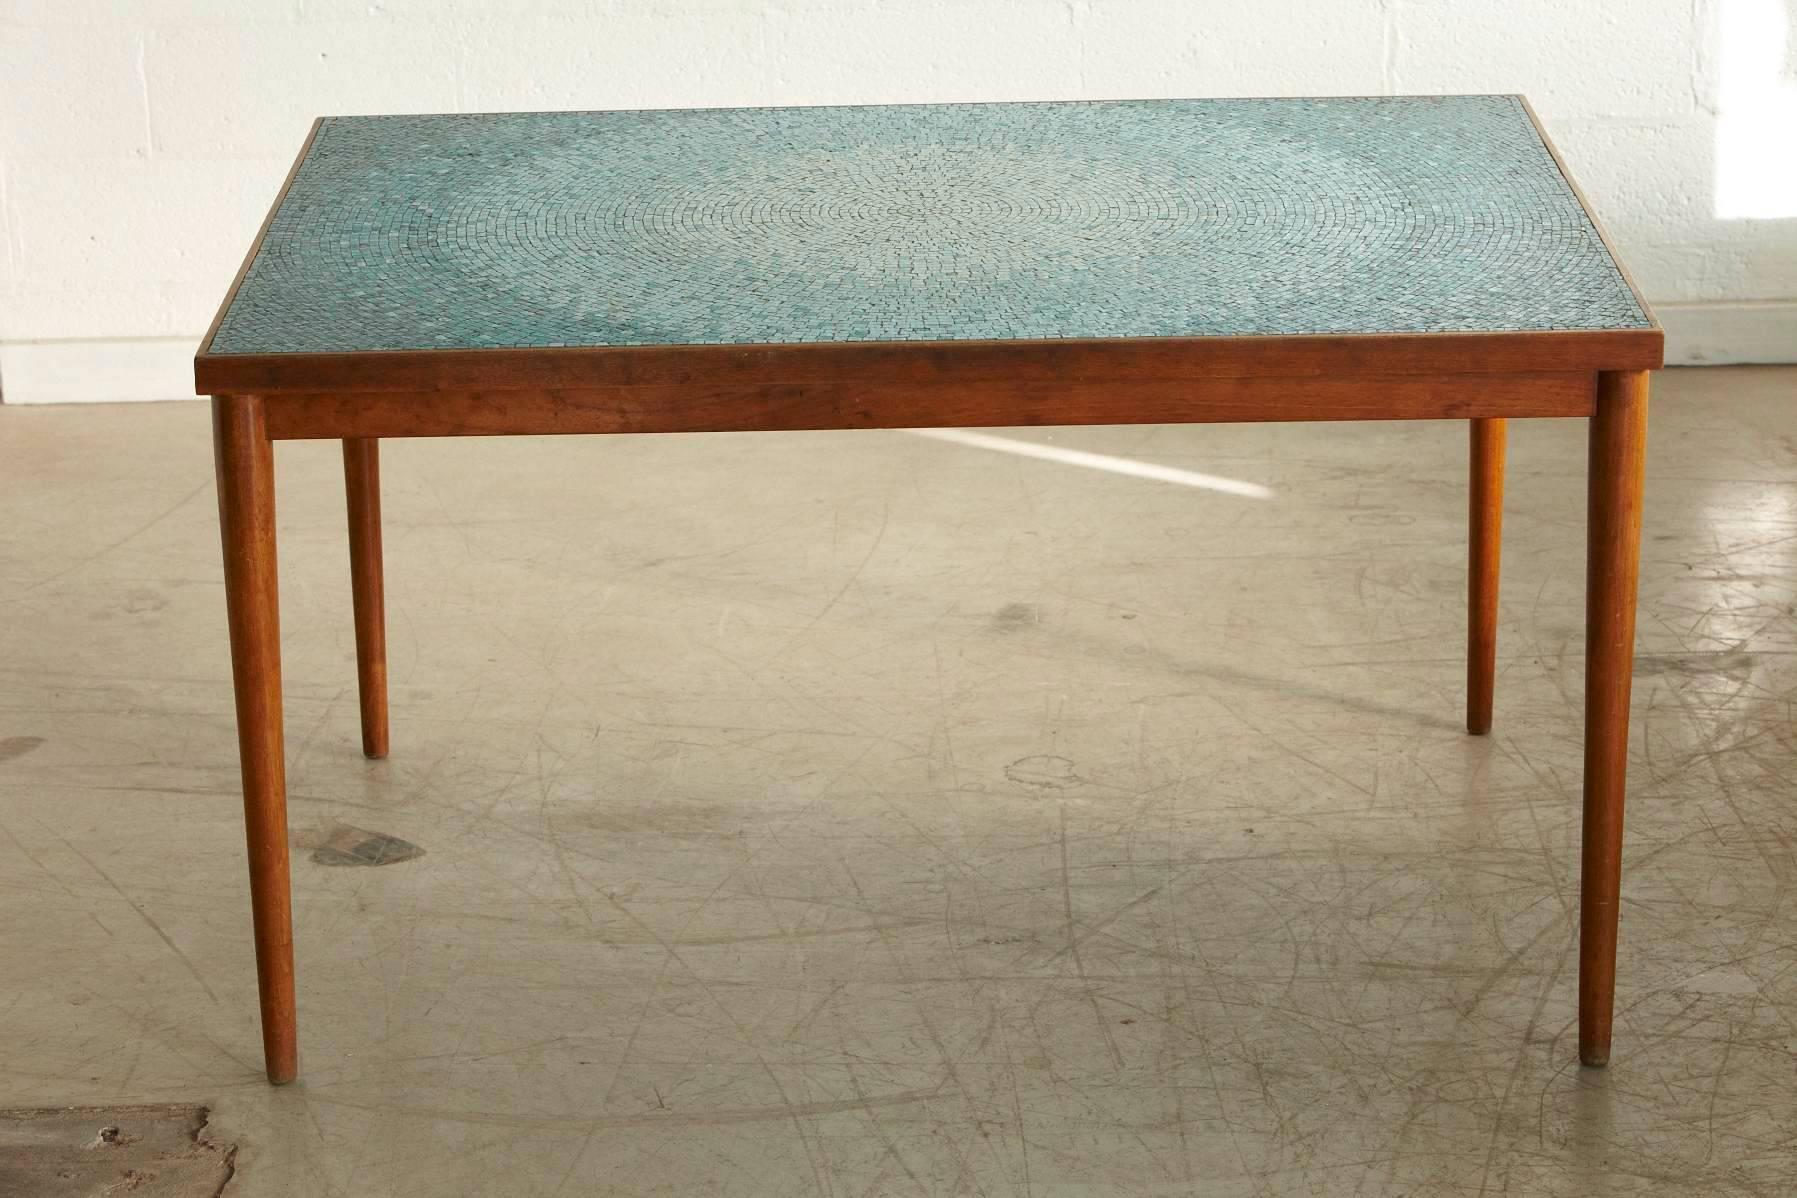 Beautiful circular degrading aquamarine pattern for this tile top dining or accent table attributed to Jane and Gordon Martz for Marshall Studios.
The underlying table base for the mosaic tiles is a solid wood construction, framed by a thin walnut